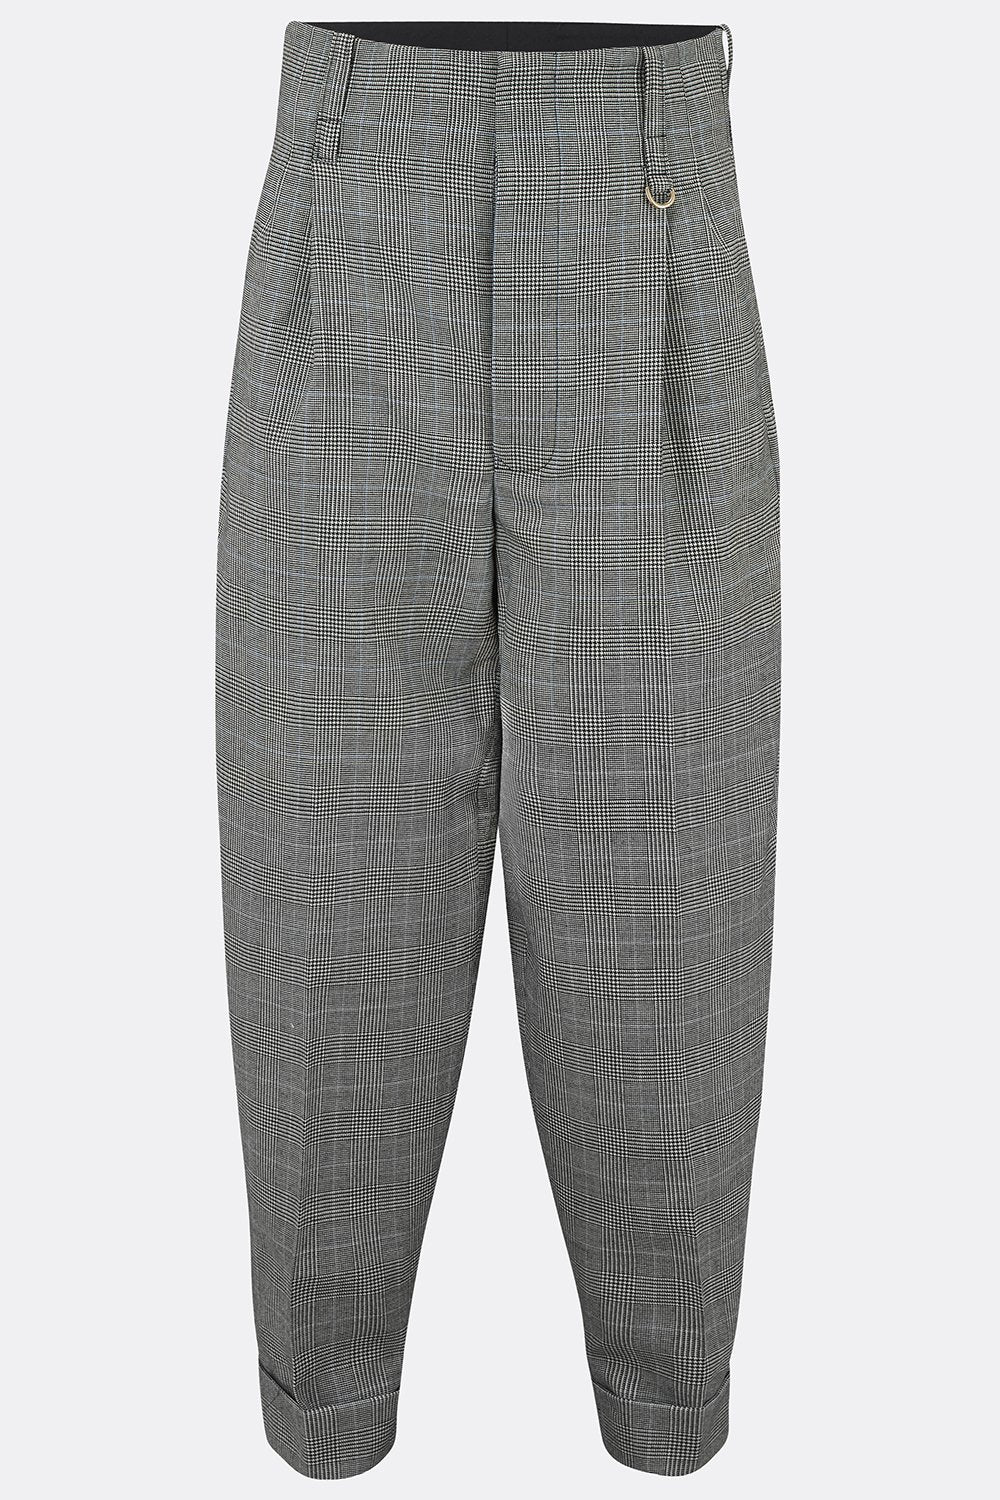 DILLINGER TROUSERS IN PRINCE OF WALES CHECK-menswear-A Child Of The Jago